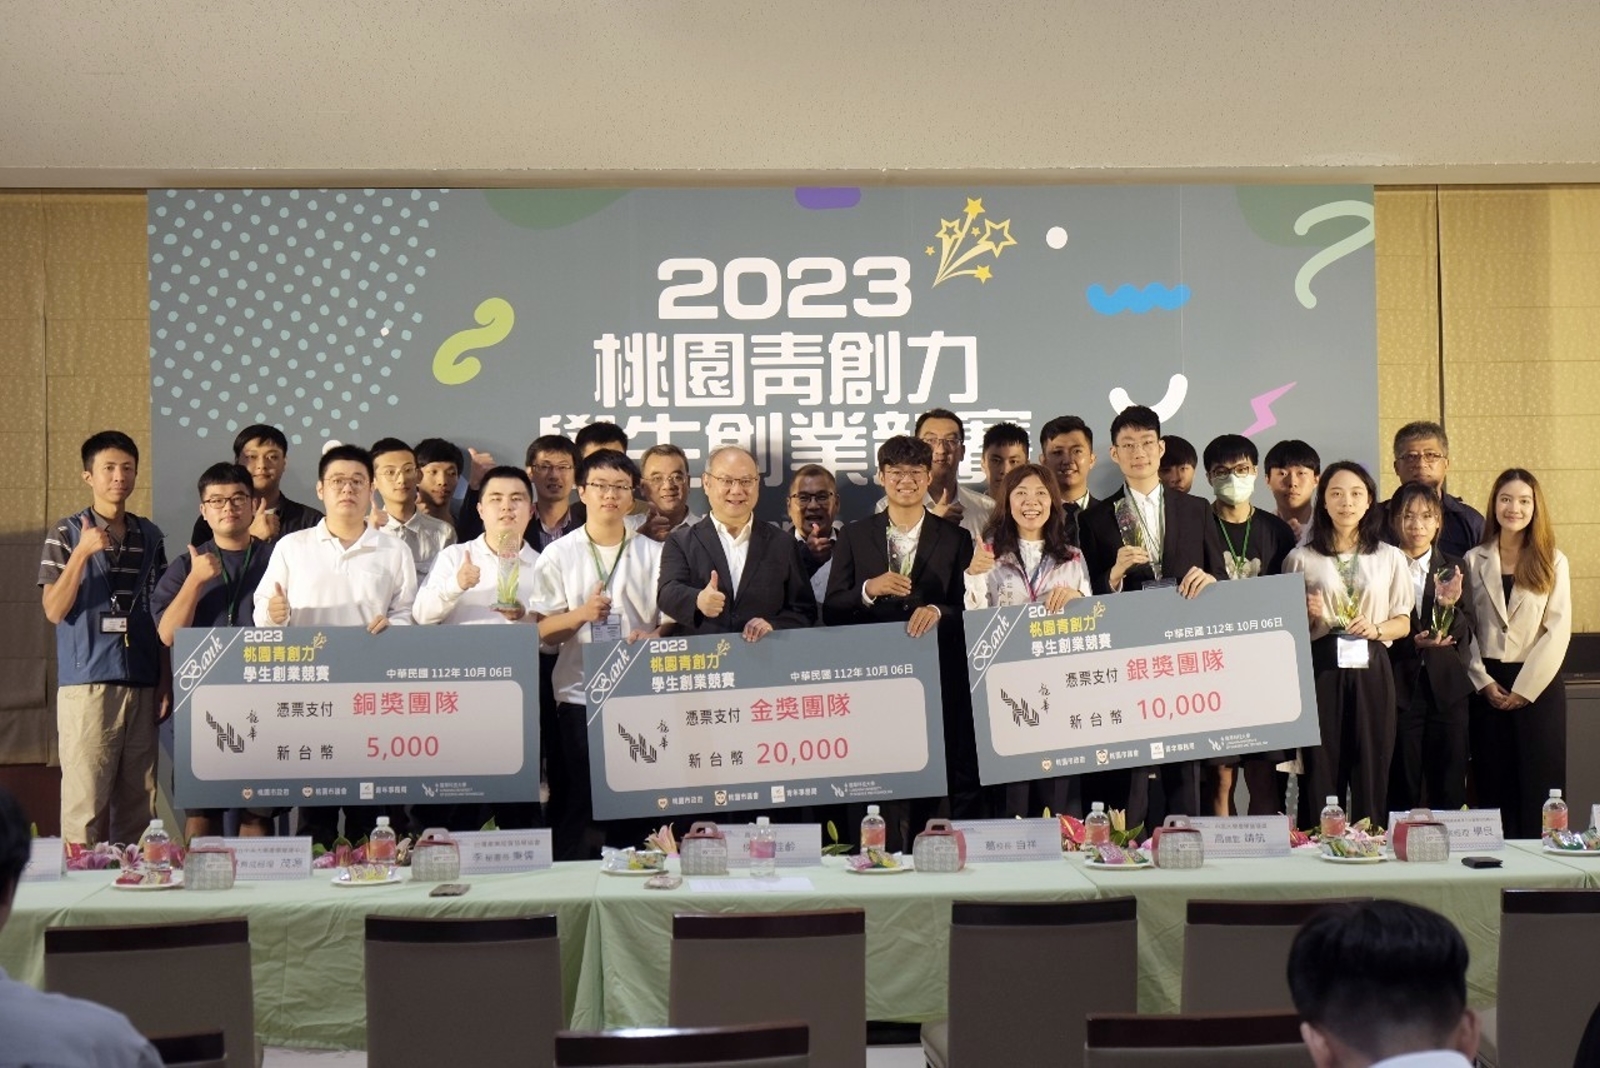 At the Student Startup Competition of Taoyuan Youth Entrepreneurship, students from Lunghwa secured a remarkable six awards, comprising one silver medal, one bronze medal, and four commendations, winning more than half of the awards and becoming the biggest winner of the competition.